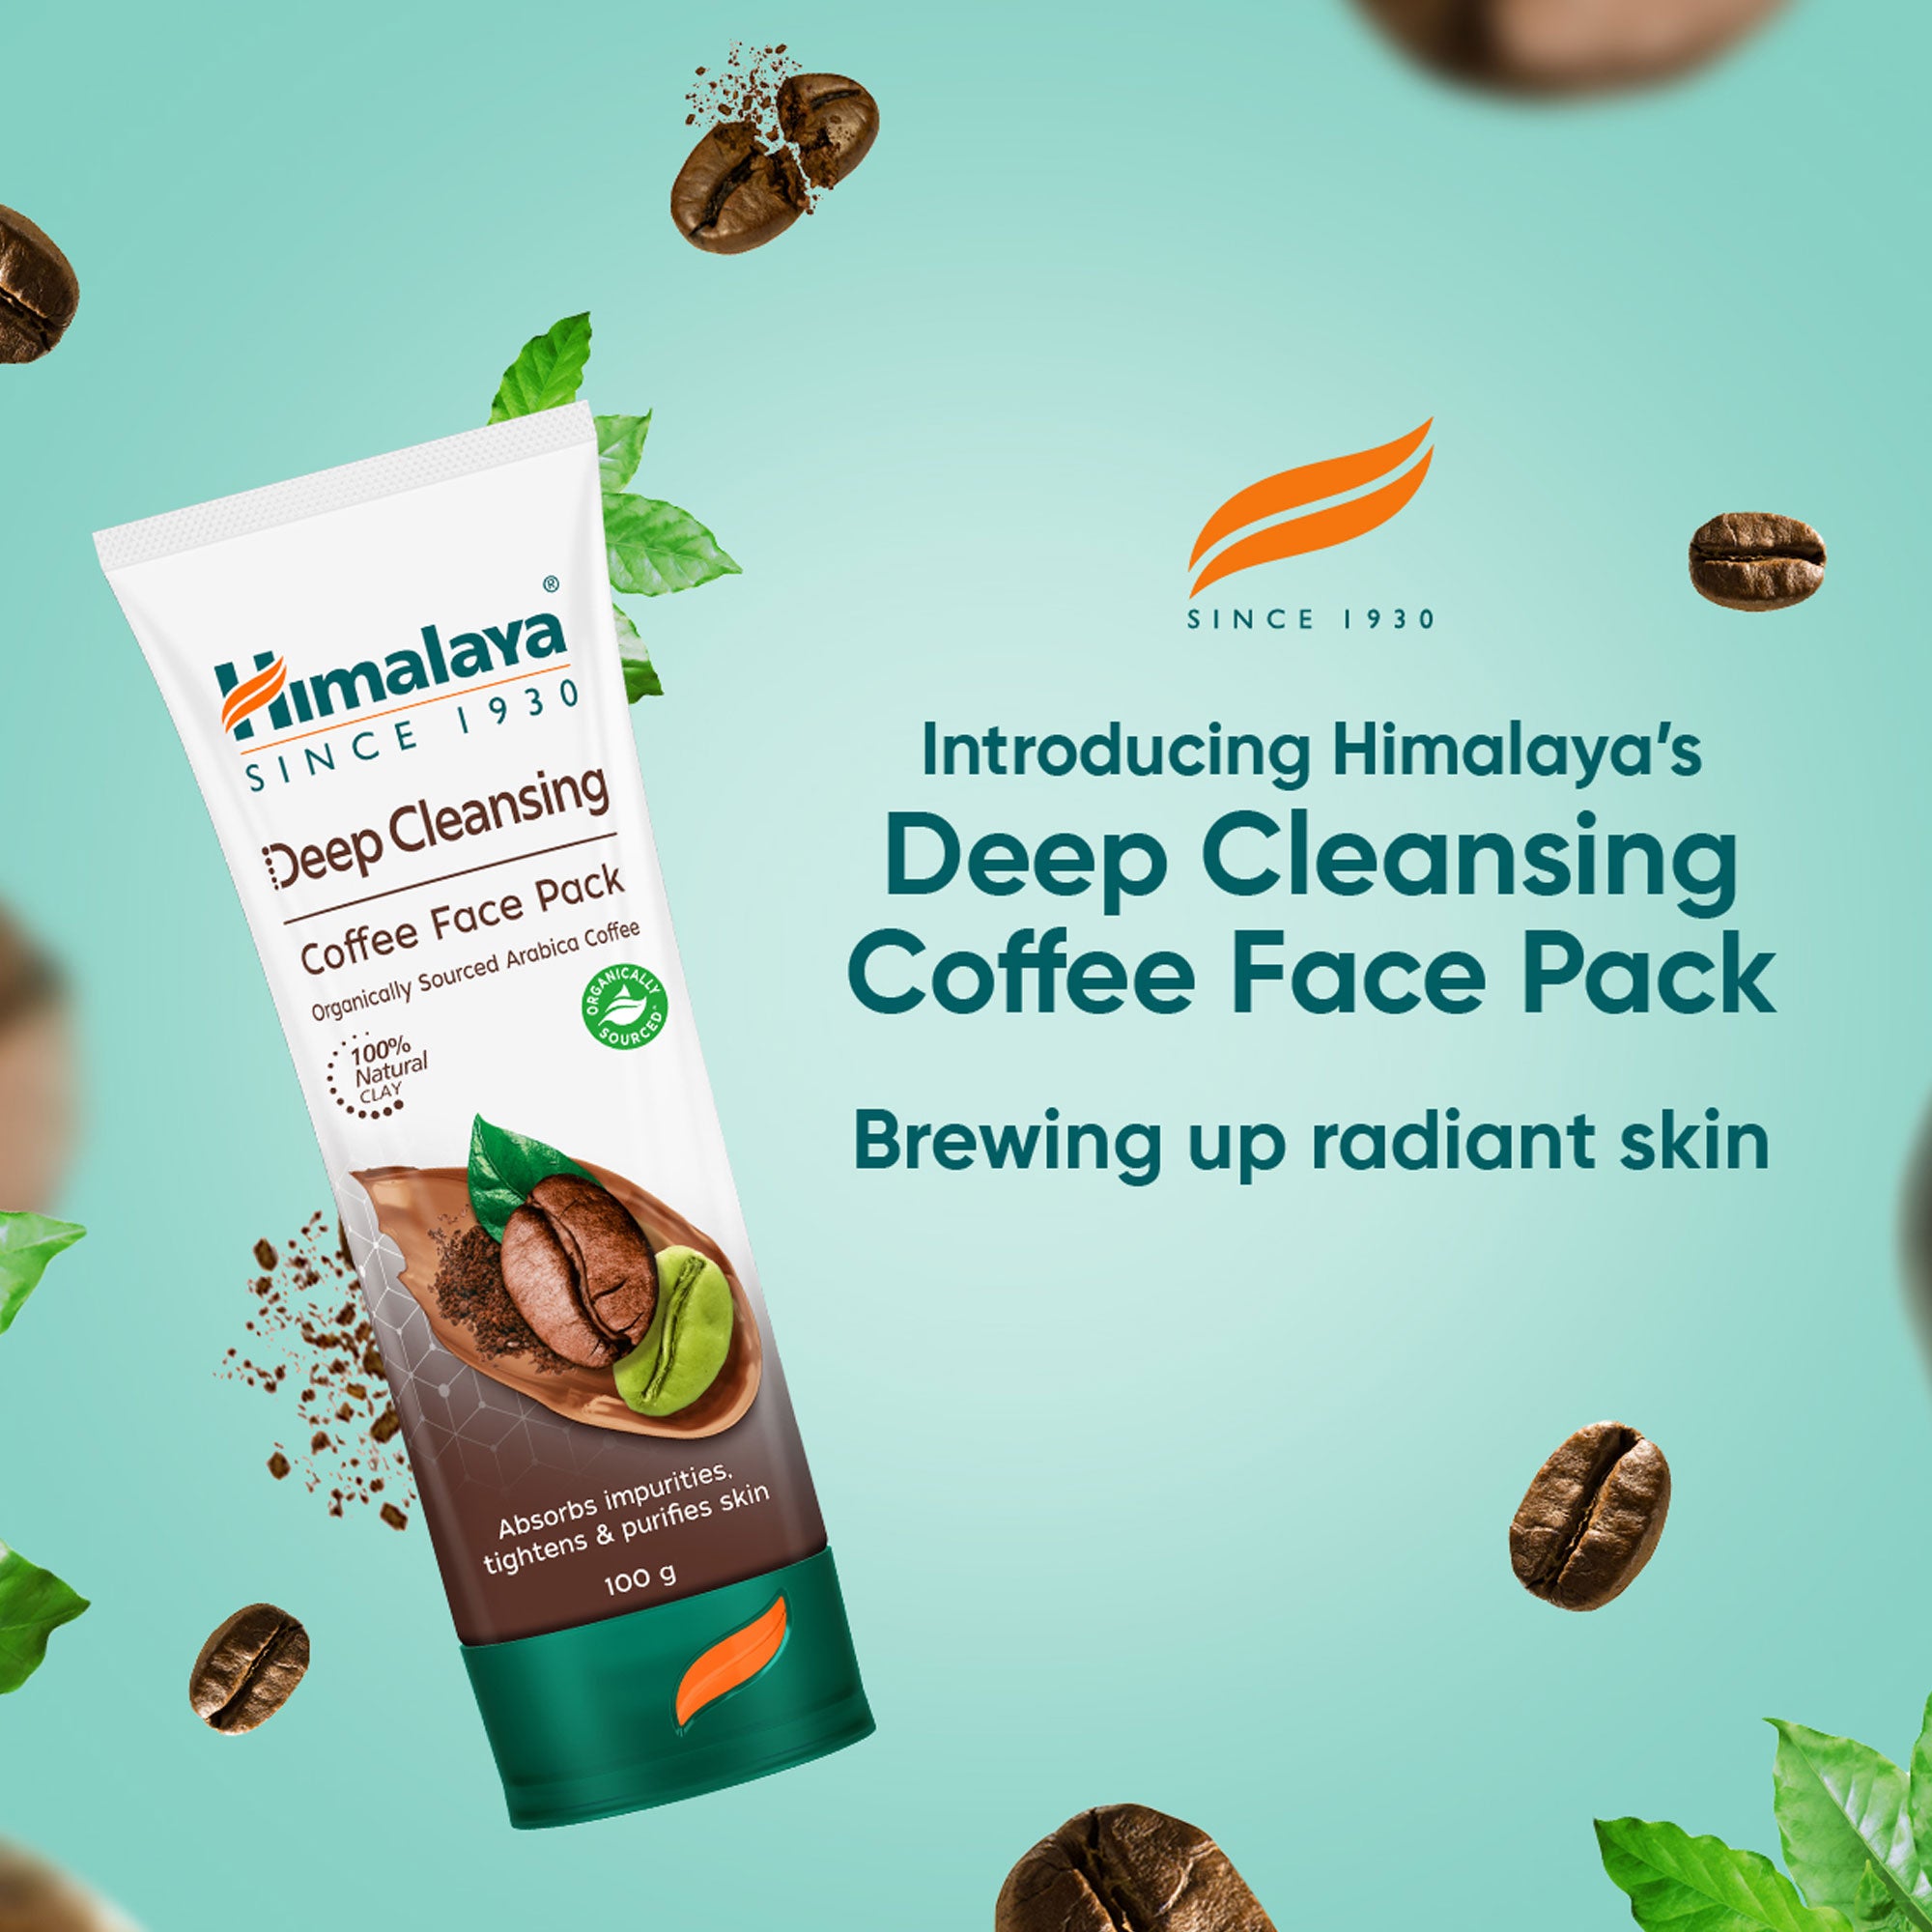 Himalaya Deep Cleansing Coffee Face Pack 100g - Brewing up radiant skin